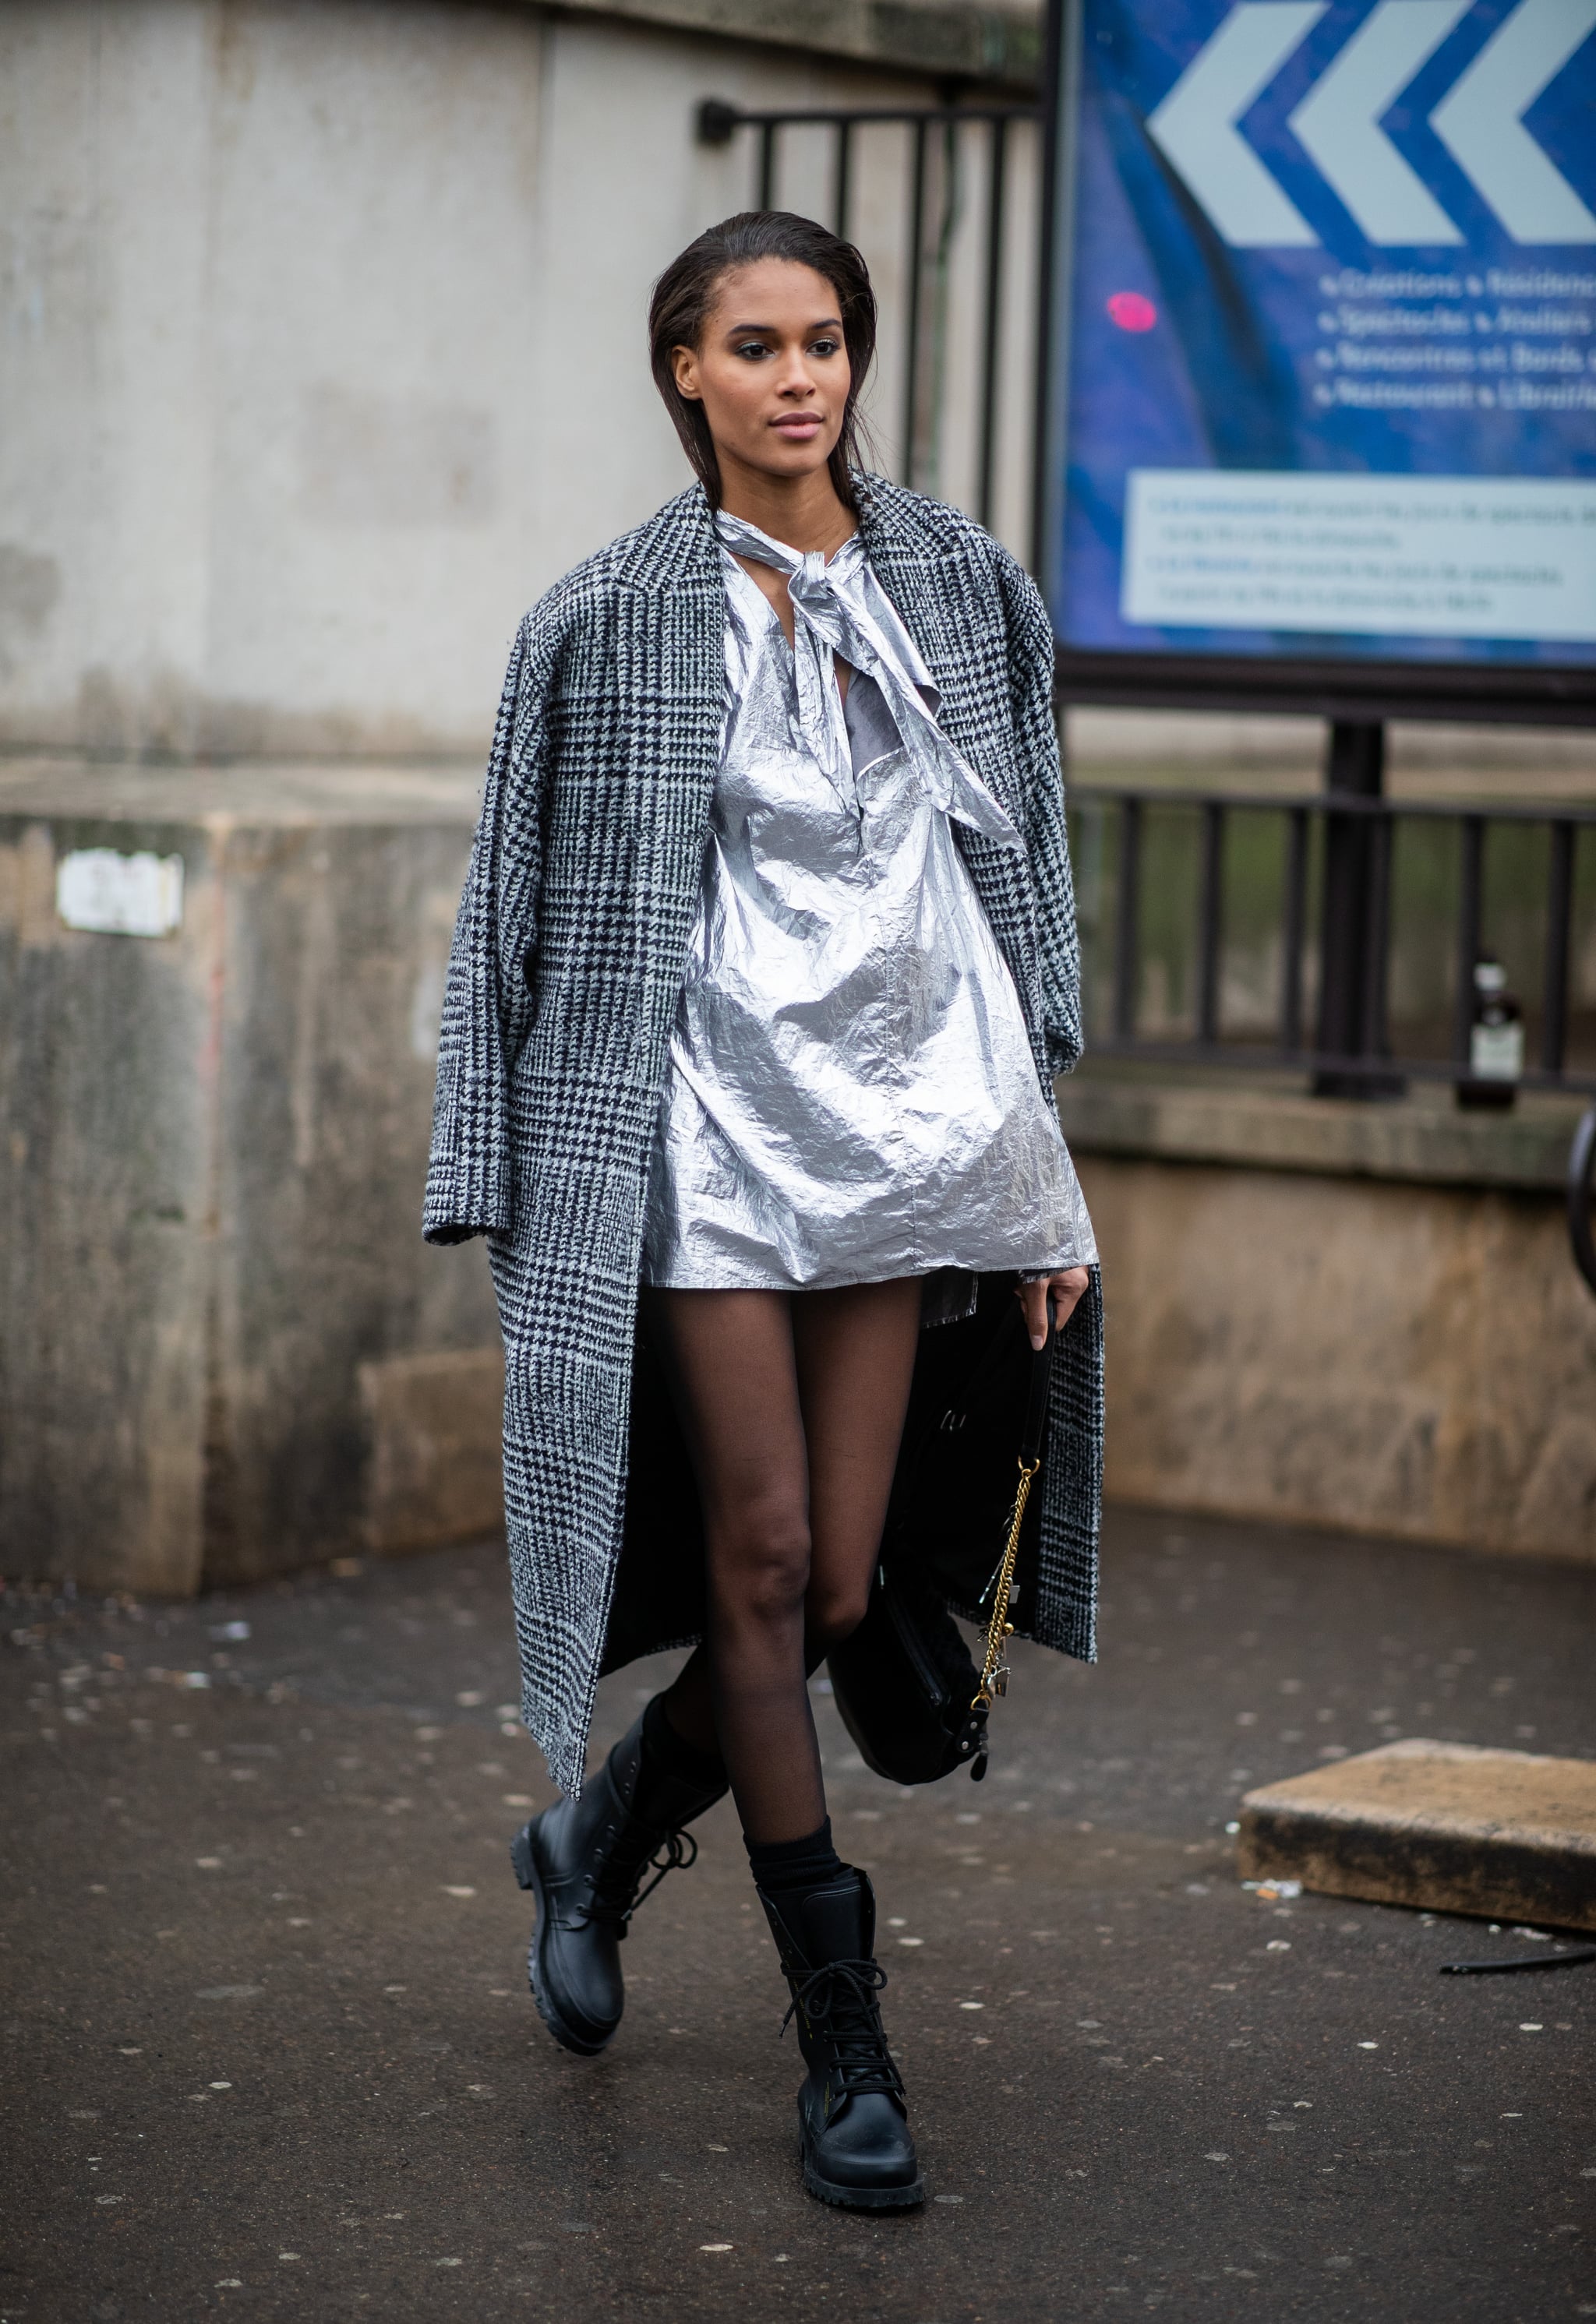 Sheer Style With a Metallic Mini and Wool Coat